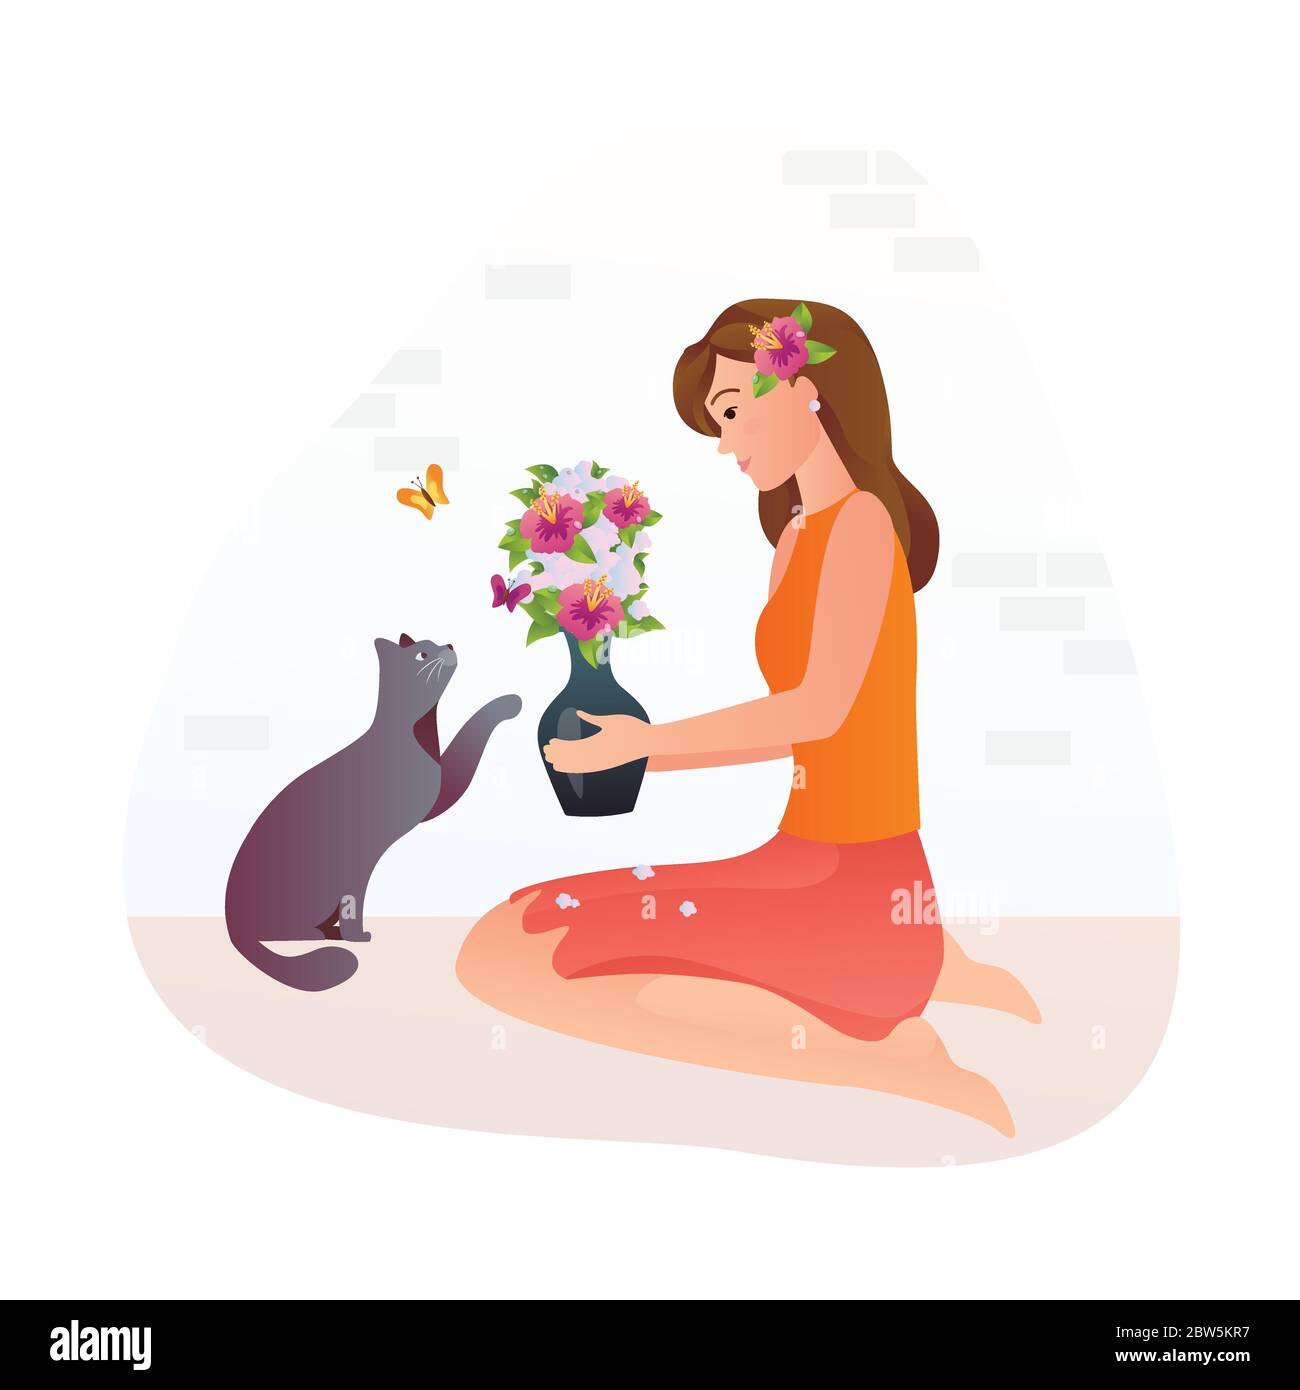 Girl holds a vase with flowers in her hands. The cat is smelling flowers. Stock Vector